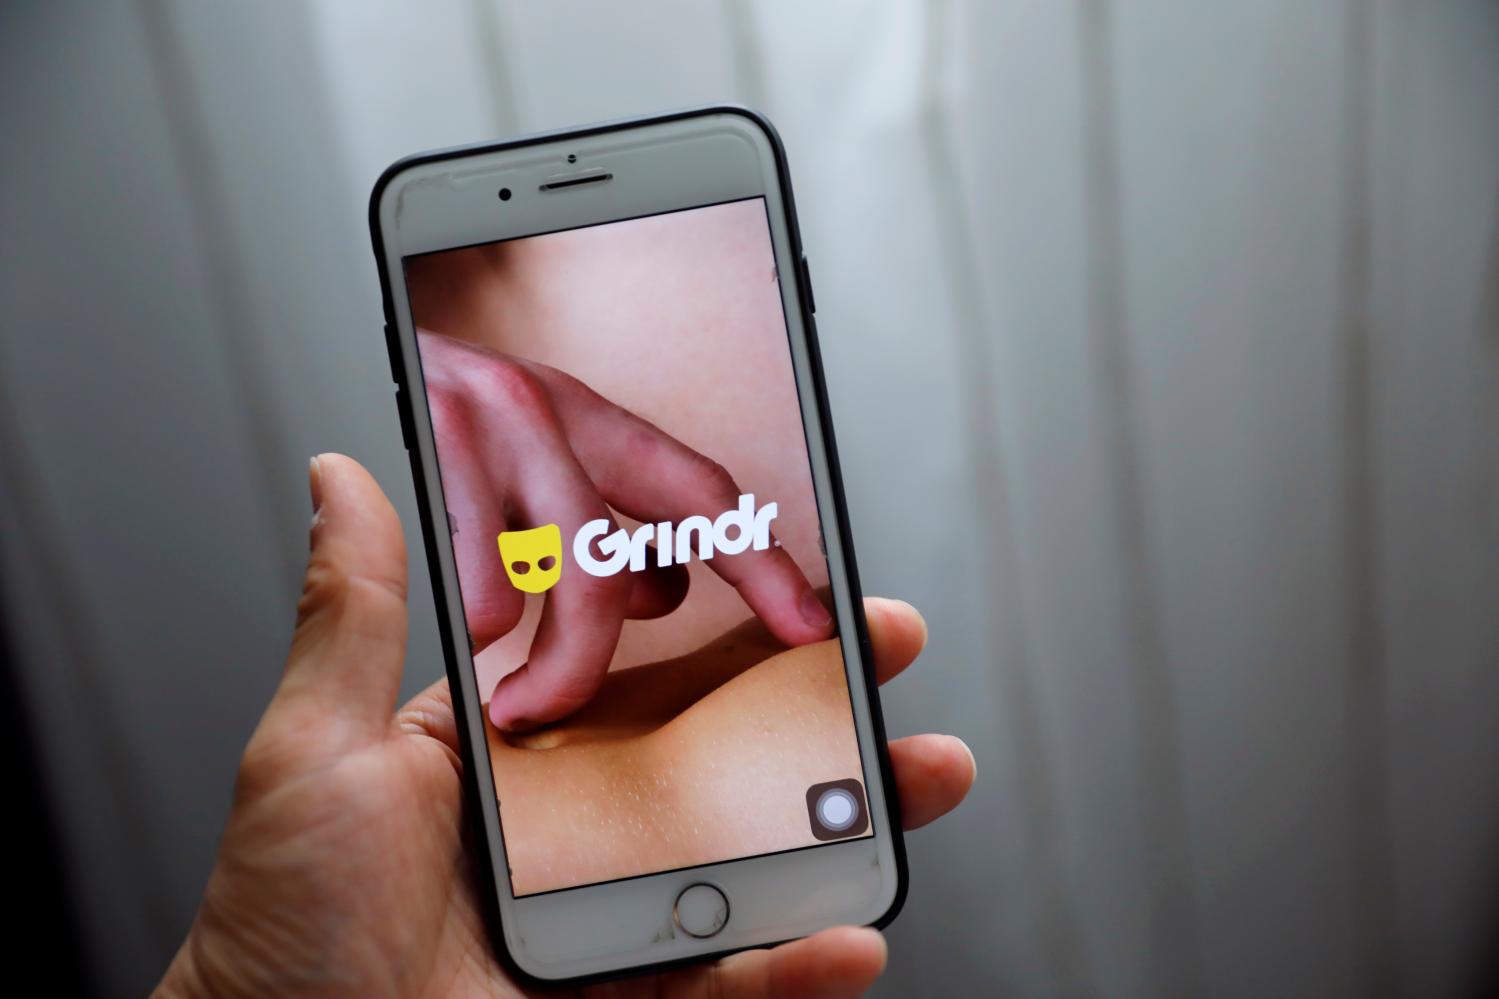 Grindr app is seen on a mobile phone in this photo illustration taken in Shanghai, China March 28, 2019. REUTERS/Aly Song/Illustration - RC14EB466900